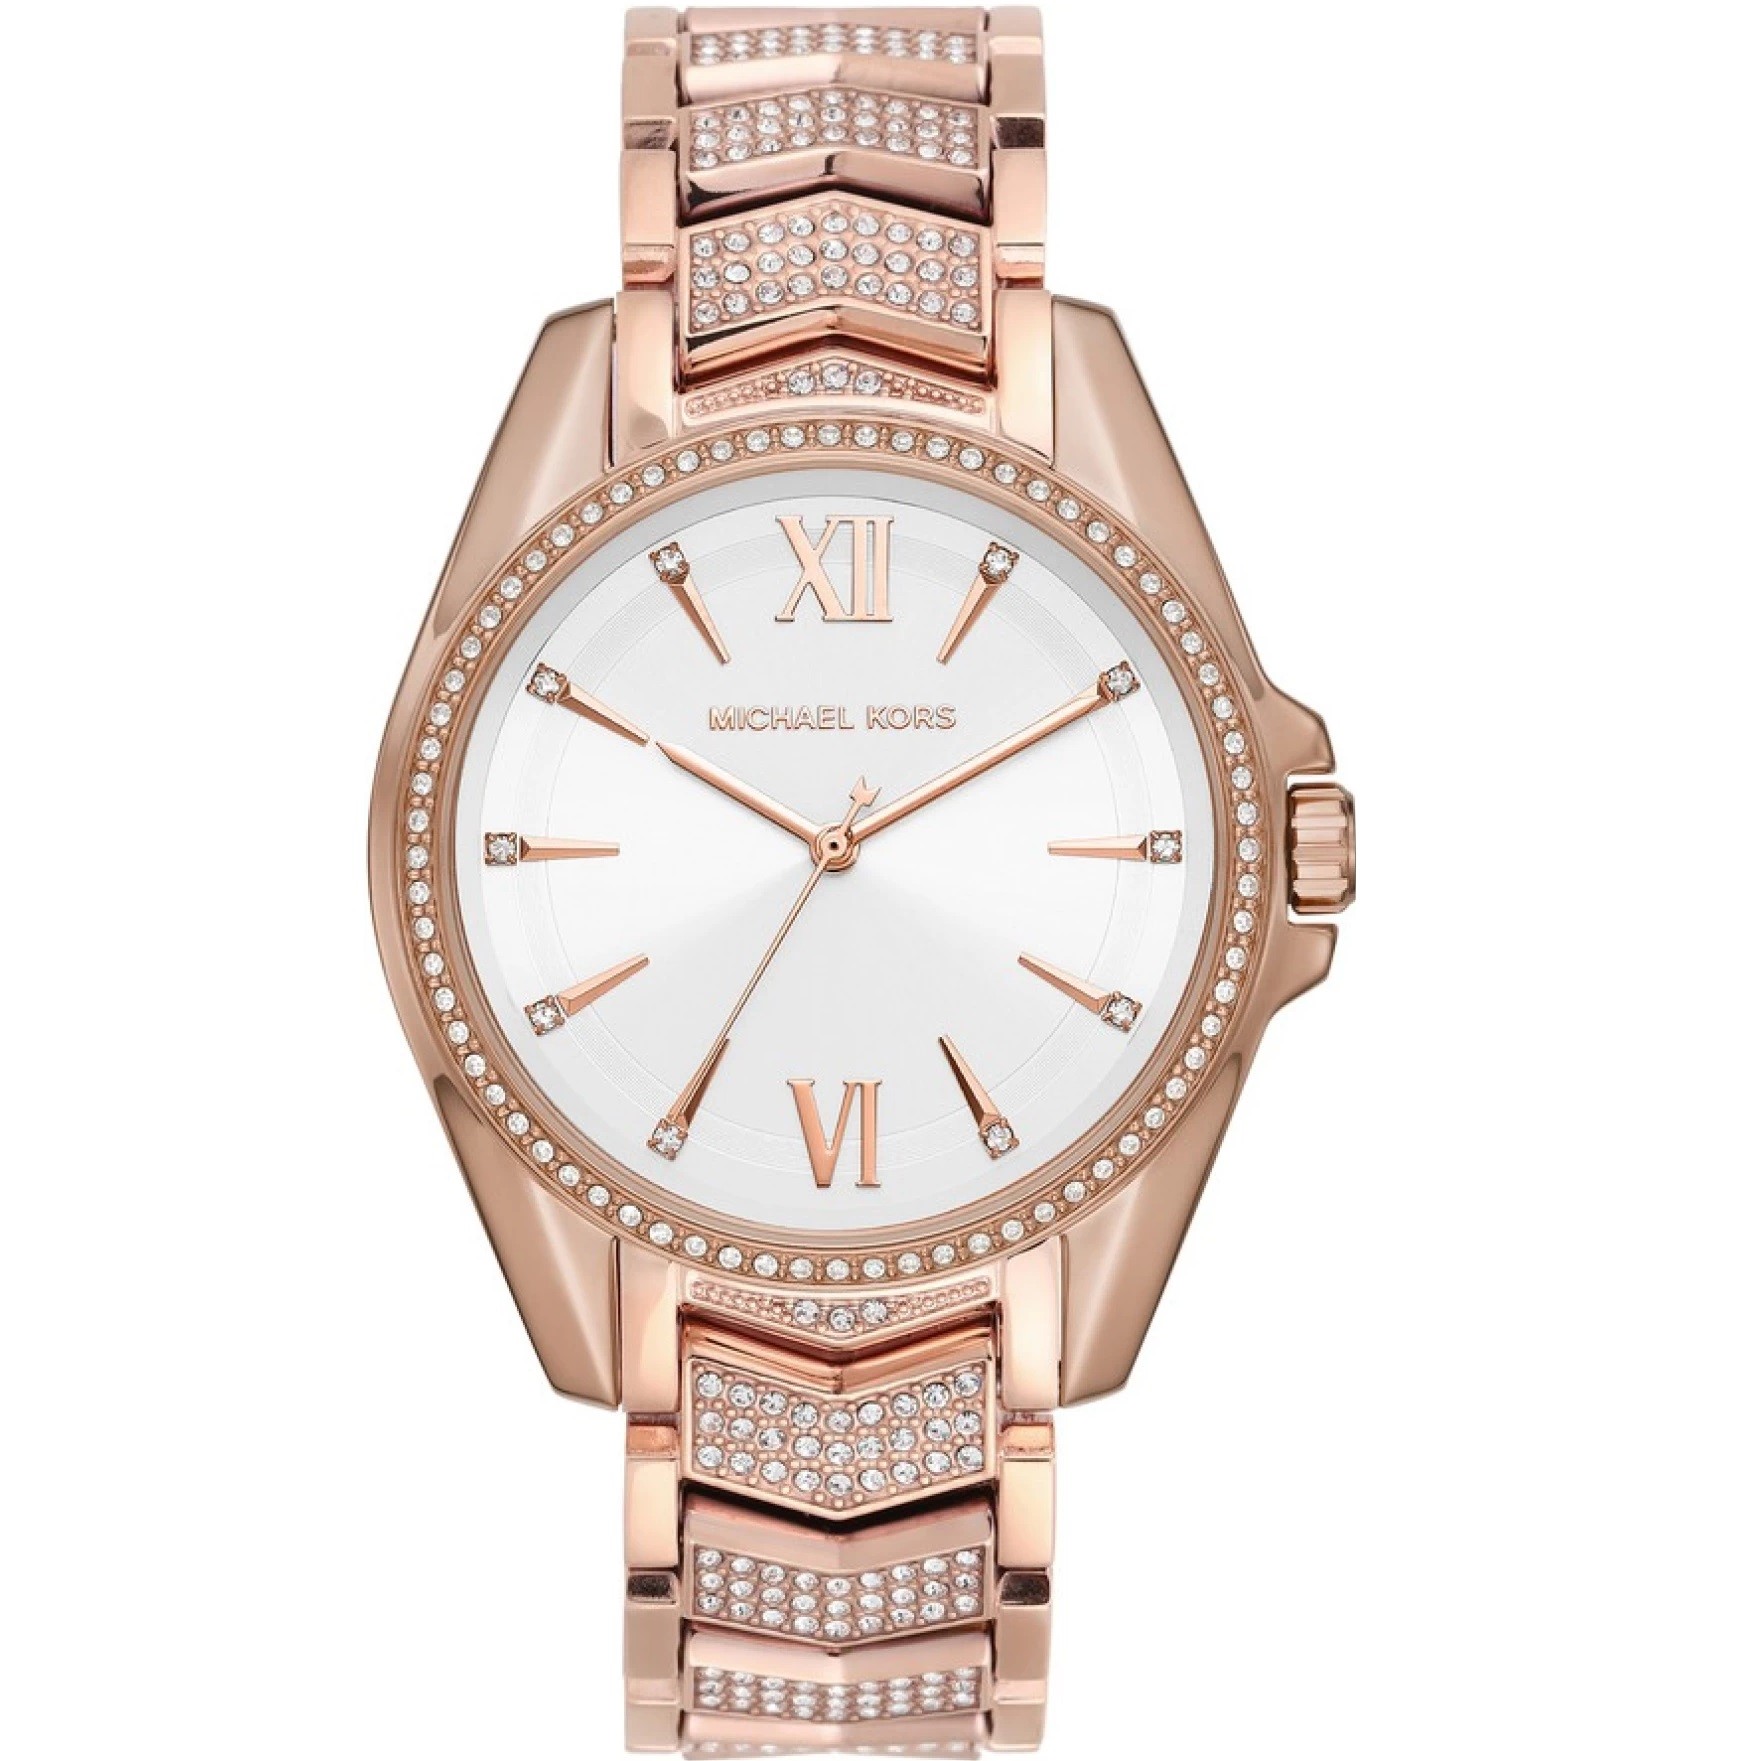 ĐỒNG HỒ ĐEO TAY DÂY KIM LOẠI MICHAEL KORS WHITNEY STAINLESS STEEL ANALOGUE WATCH MK6858 4